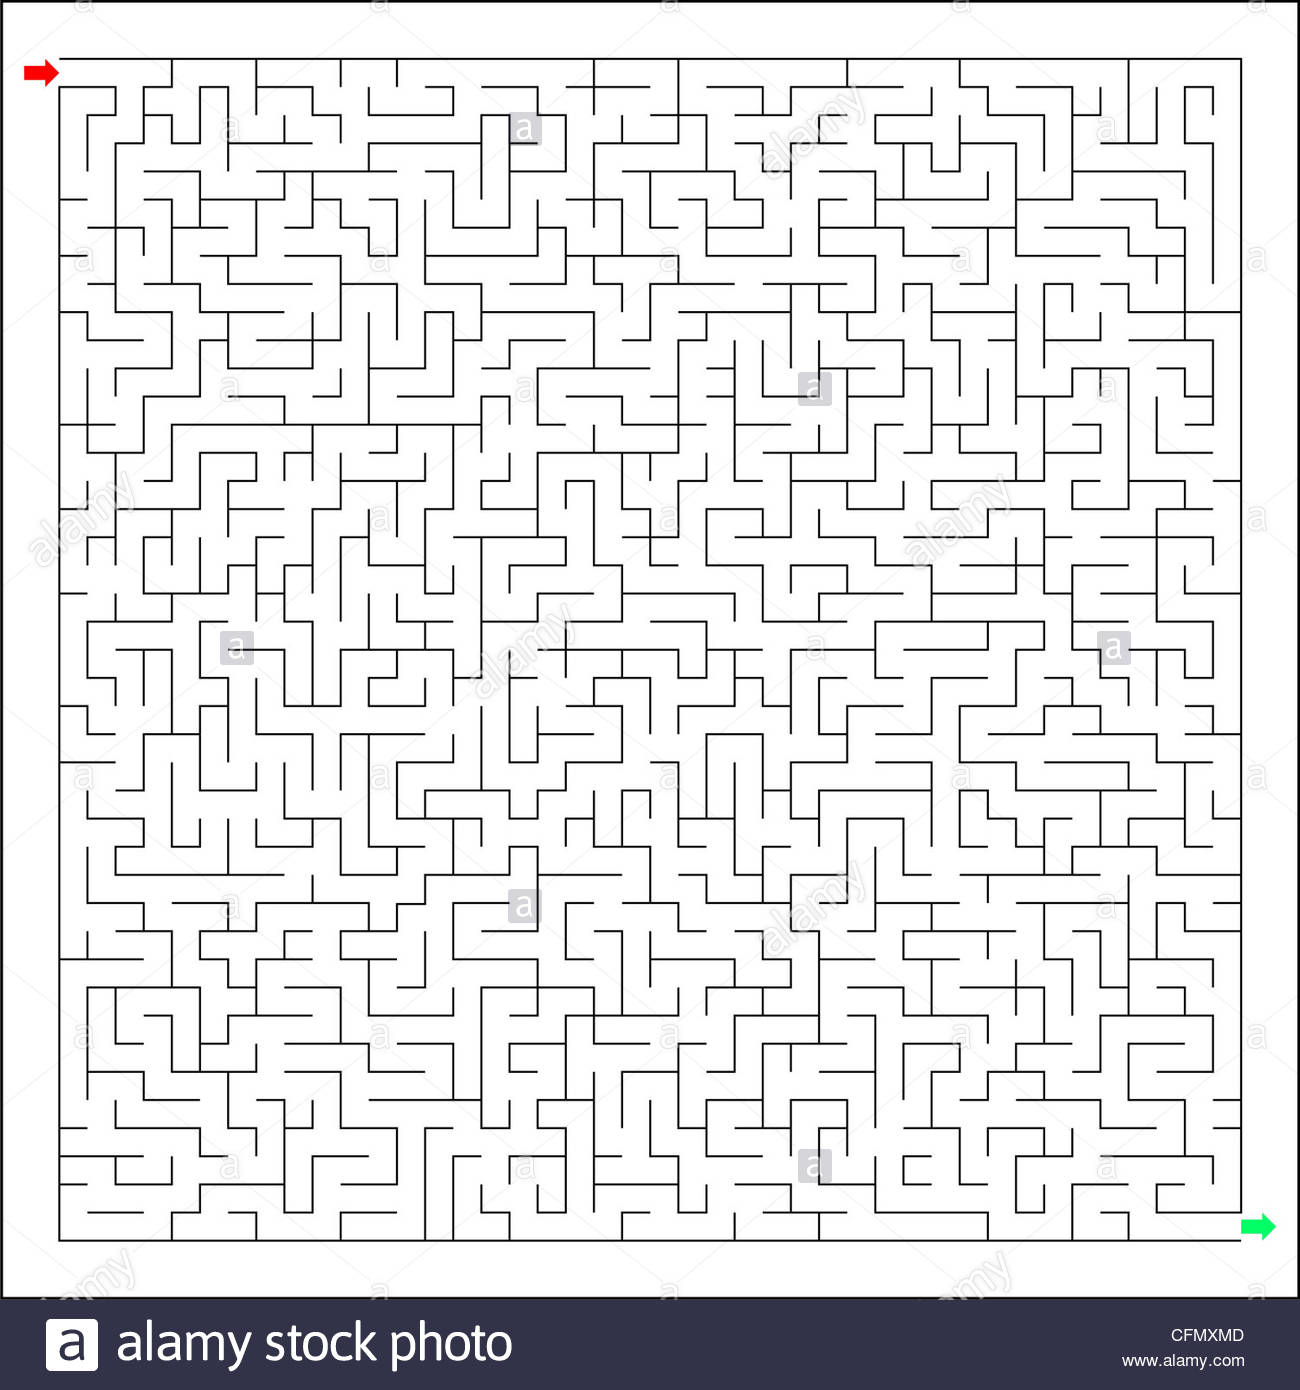 Difficult And Hard Labirynth, Maze, Brain Teaser, The Riddle tout Labyrinthe Difficile 